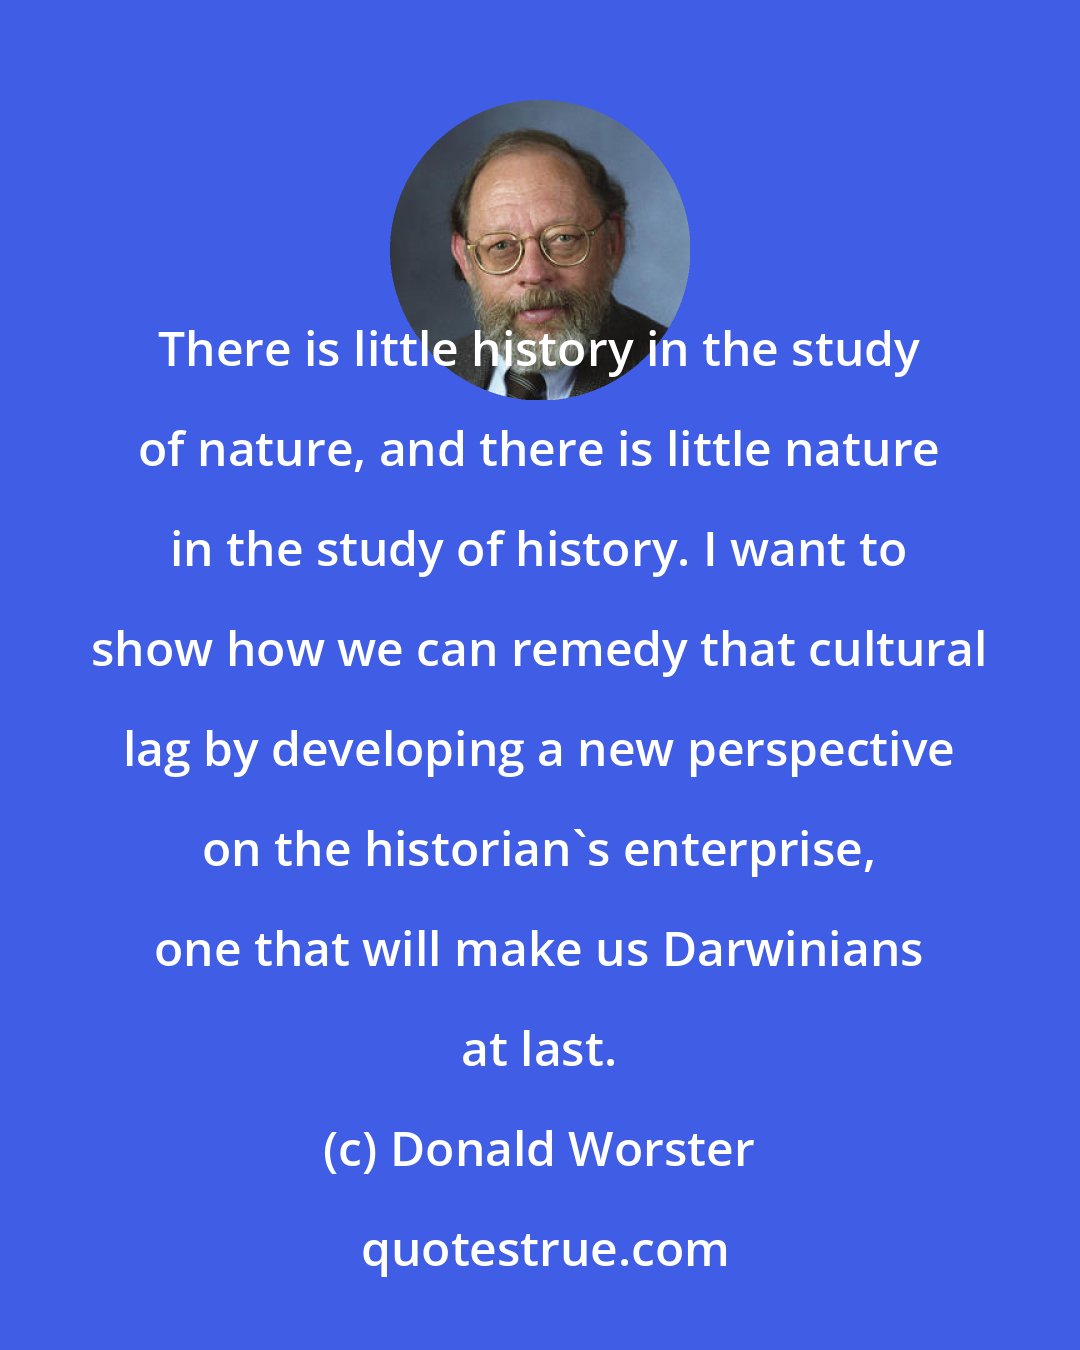 Donald Worster: There is little history in the study of nature, and there is little nature in the study of history. I want to show how we can remedy that cultural lag by developing a new perspective on the historian's enterprise, one that will make us Darwinians at last.